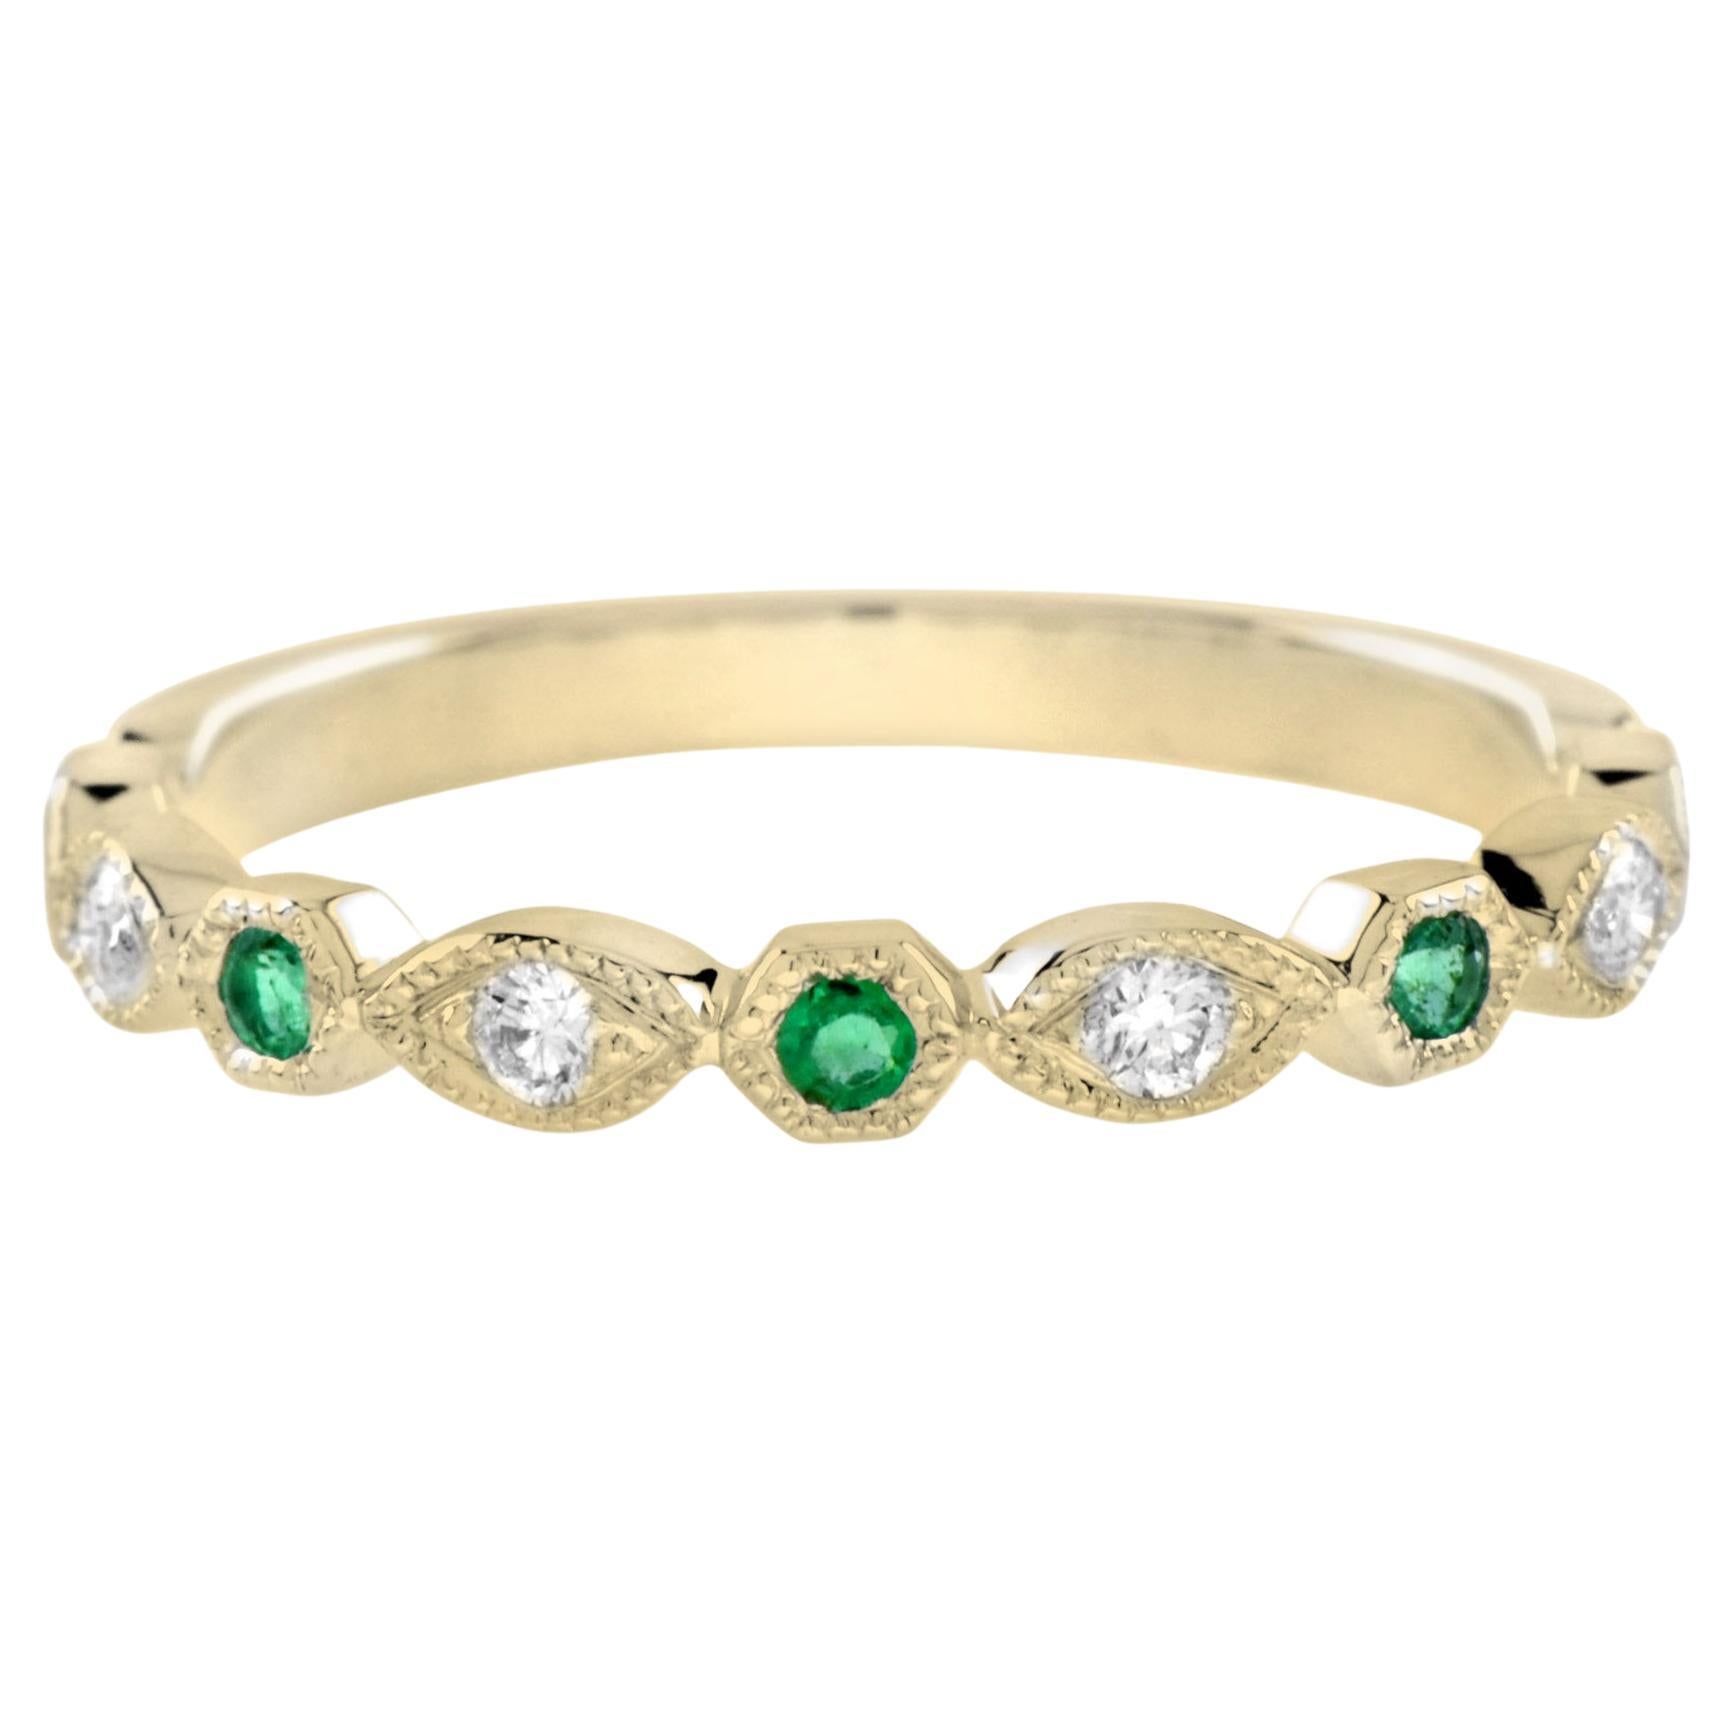 Emerald and Diamond Vintage Style Half Eternity Band Ring in 14K Yellow Gold